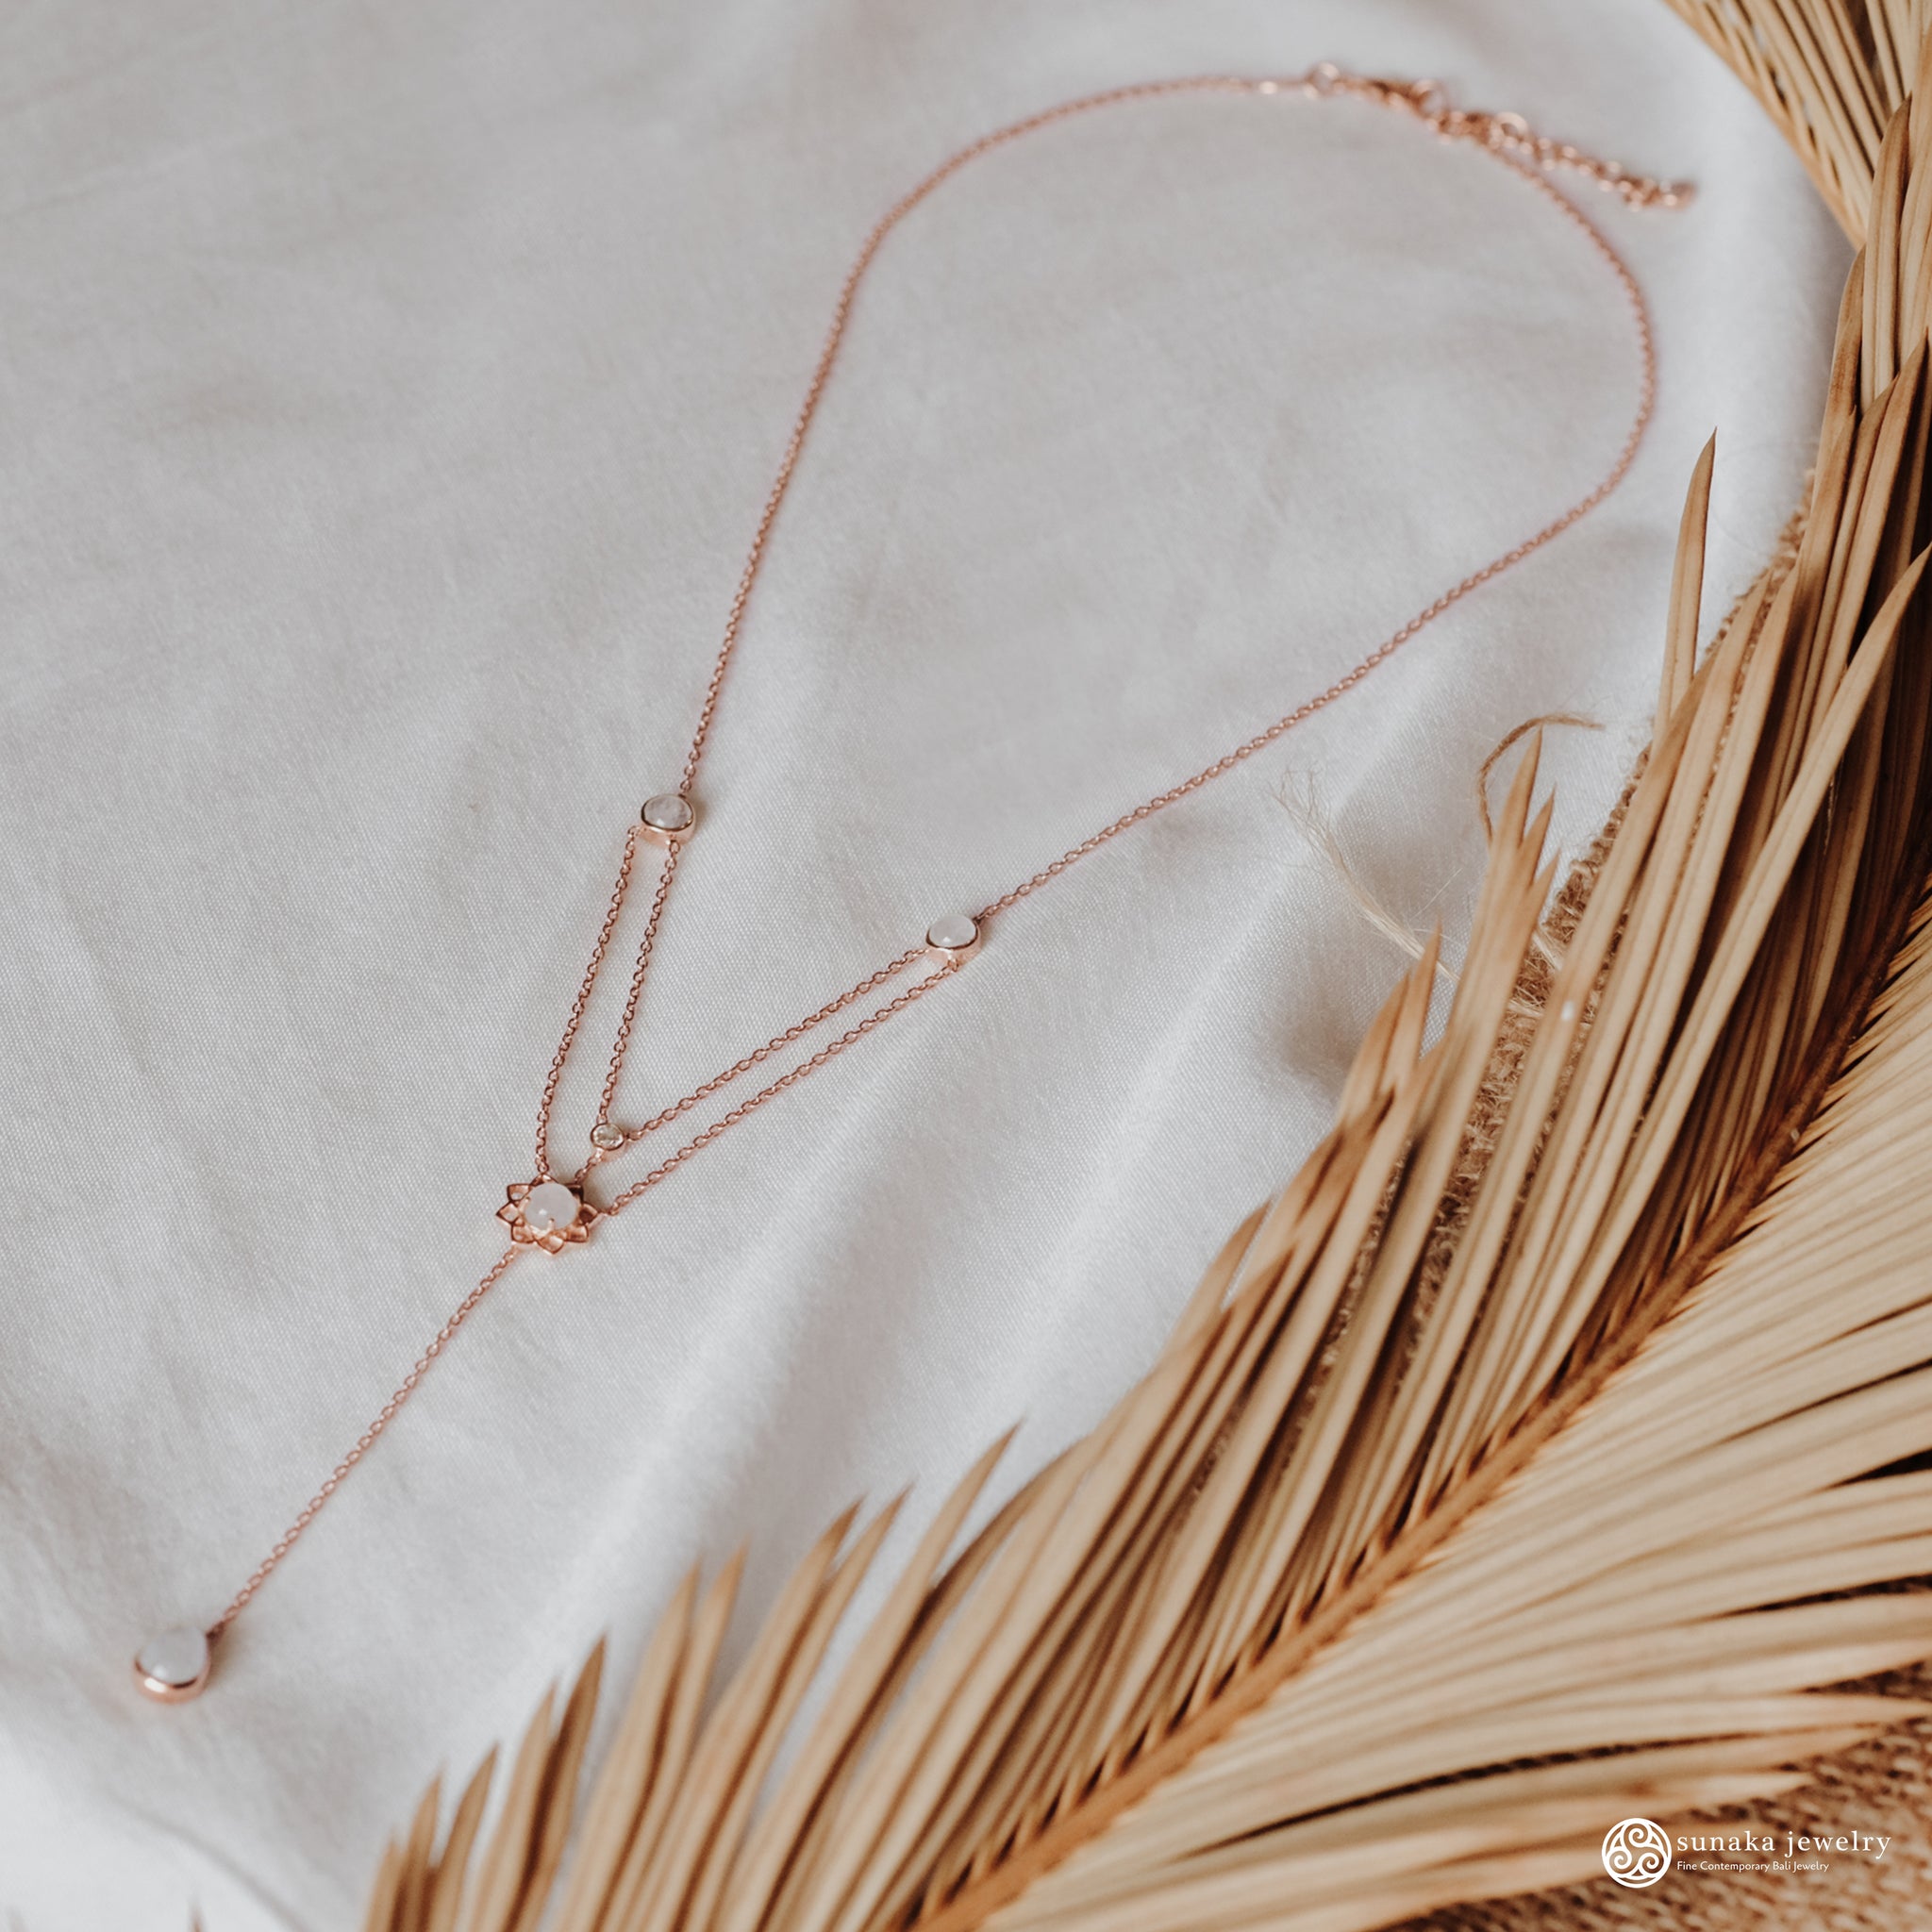 Moonstone Layered Necklace Rose Gold Plated in Sterling Silver